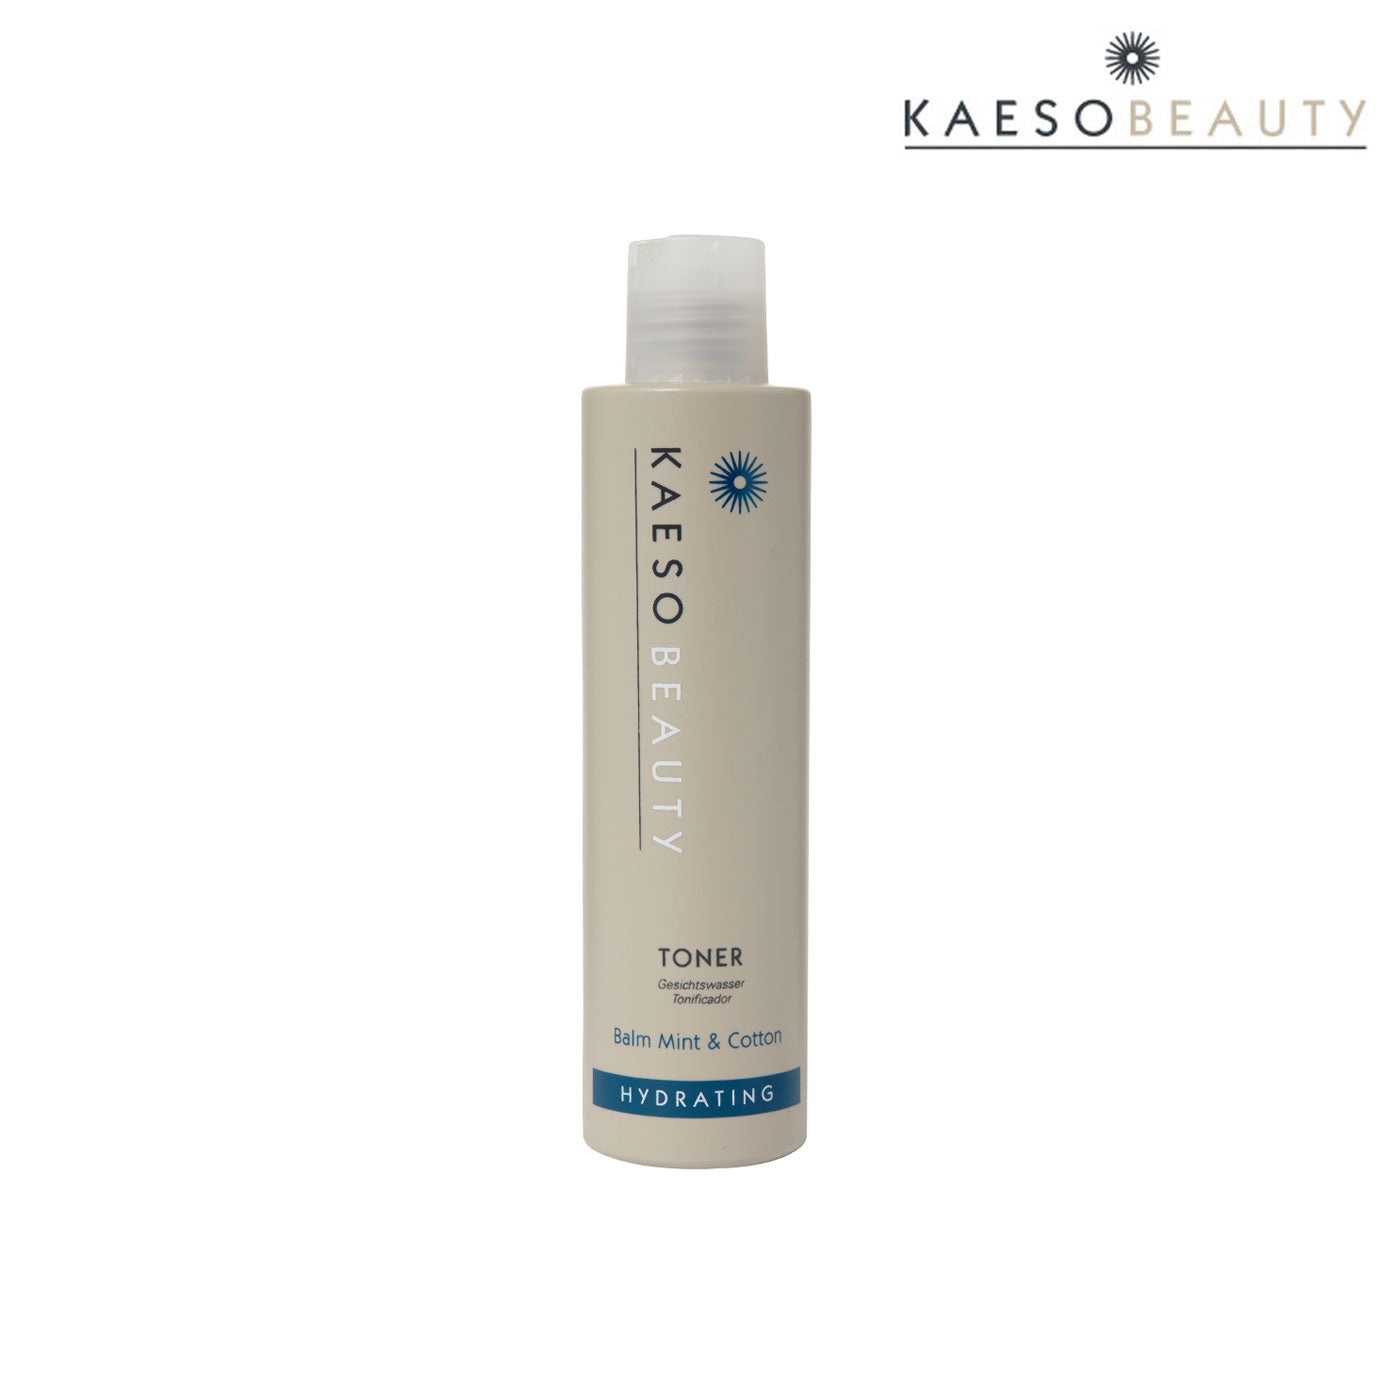  495ml. - Ultimate Hair and Beauty